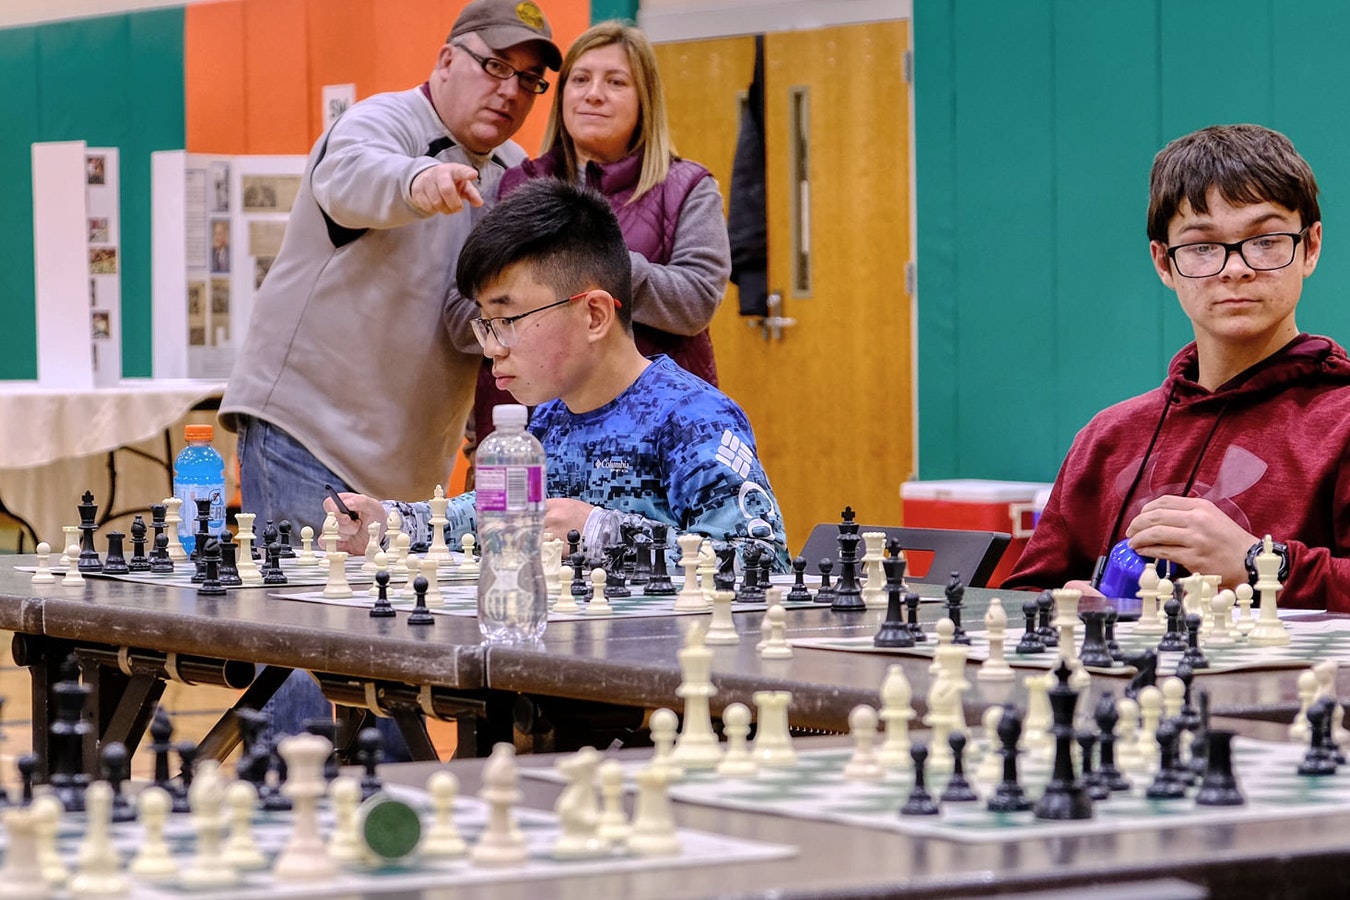 The first Sheridan Chess Association tournament last year was a huge success, and this year's event promises to be the largest ever for the game in Wyoming.